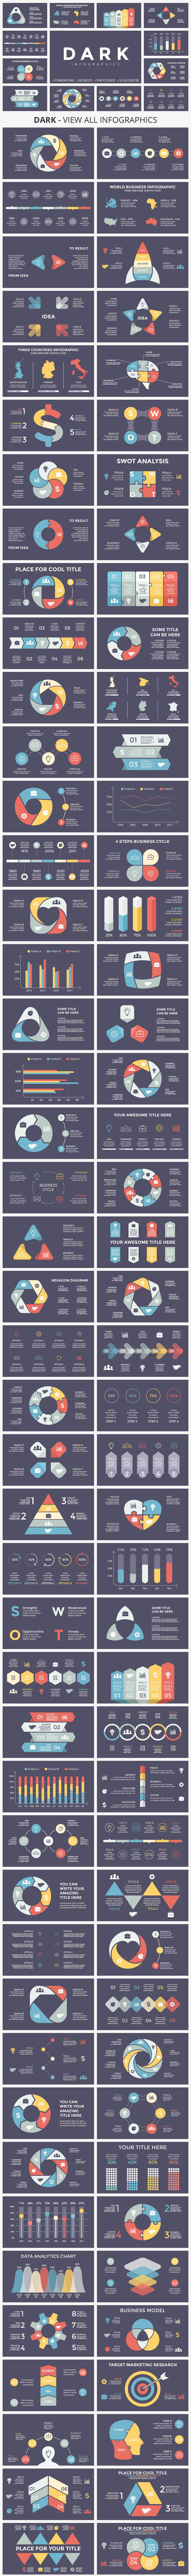 Modern and stylish infographic with a lot of different elements for improving presentation.